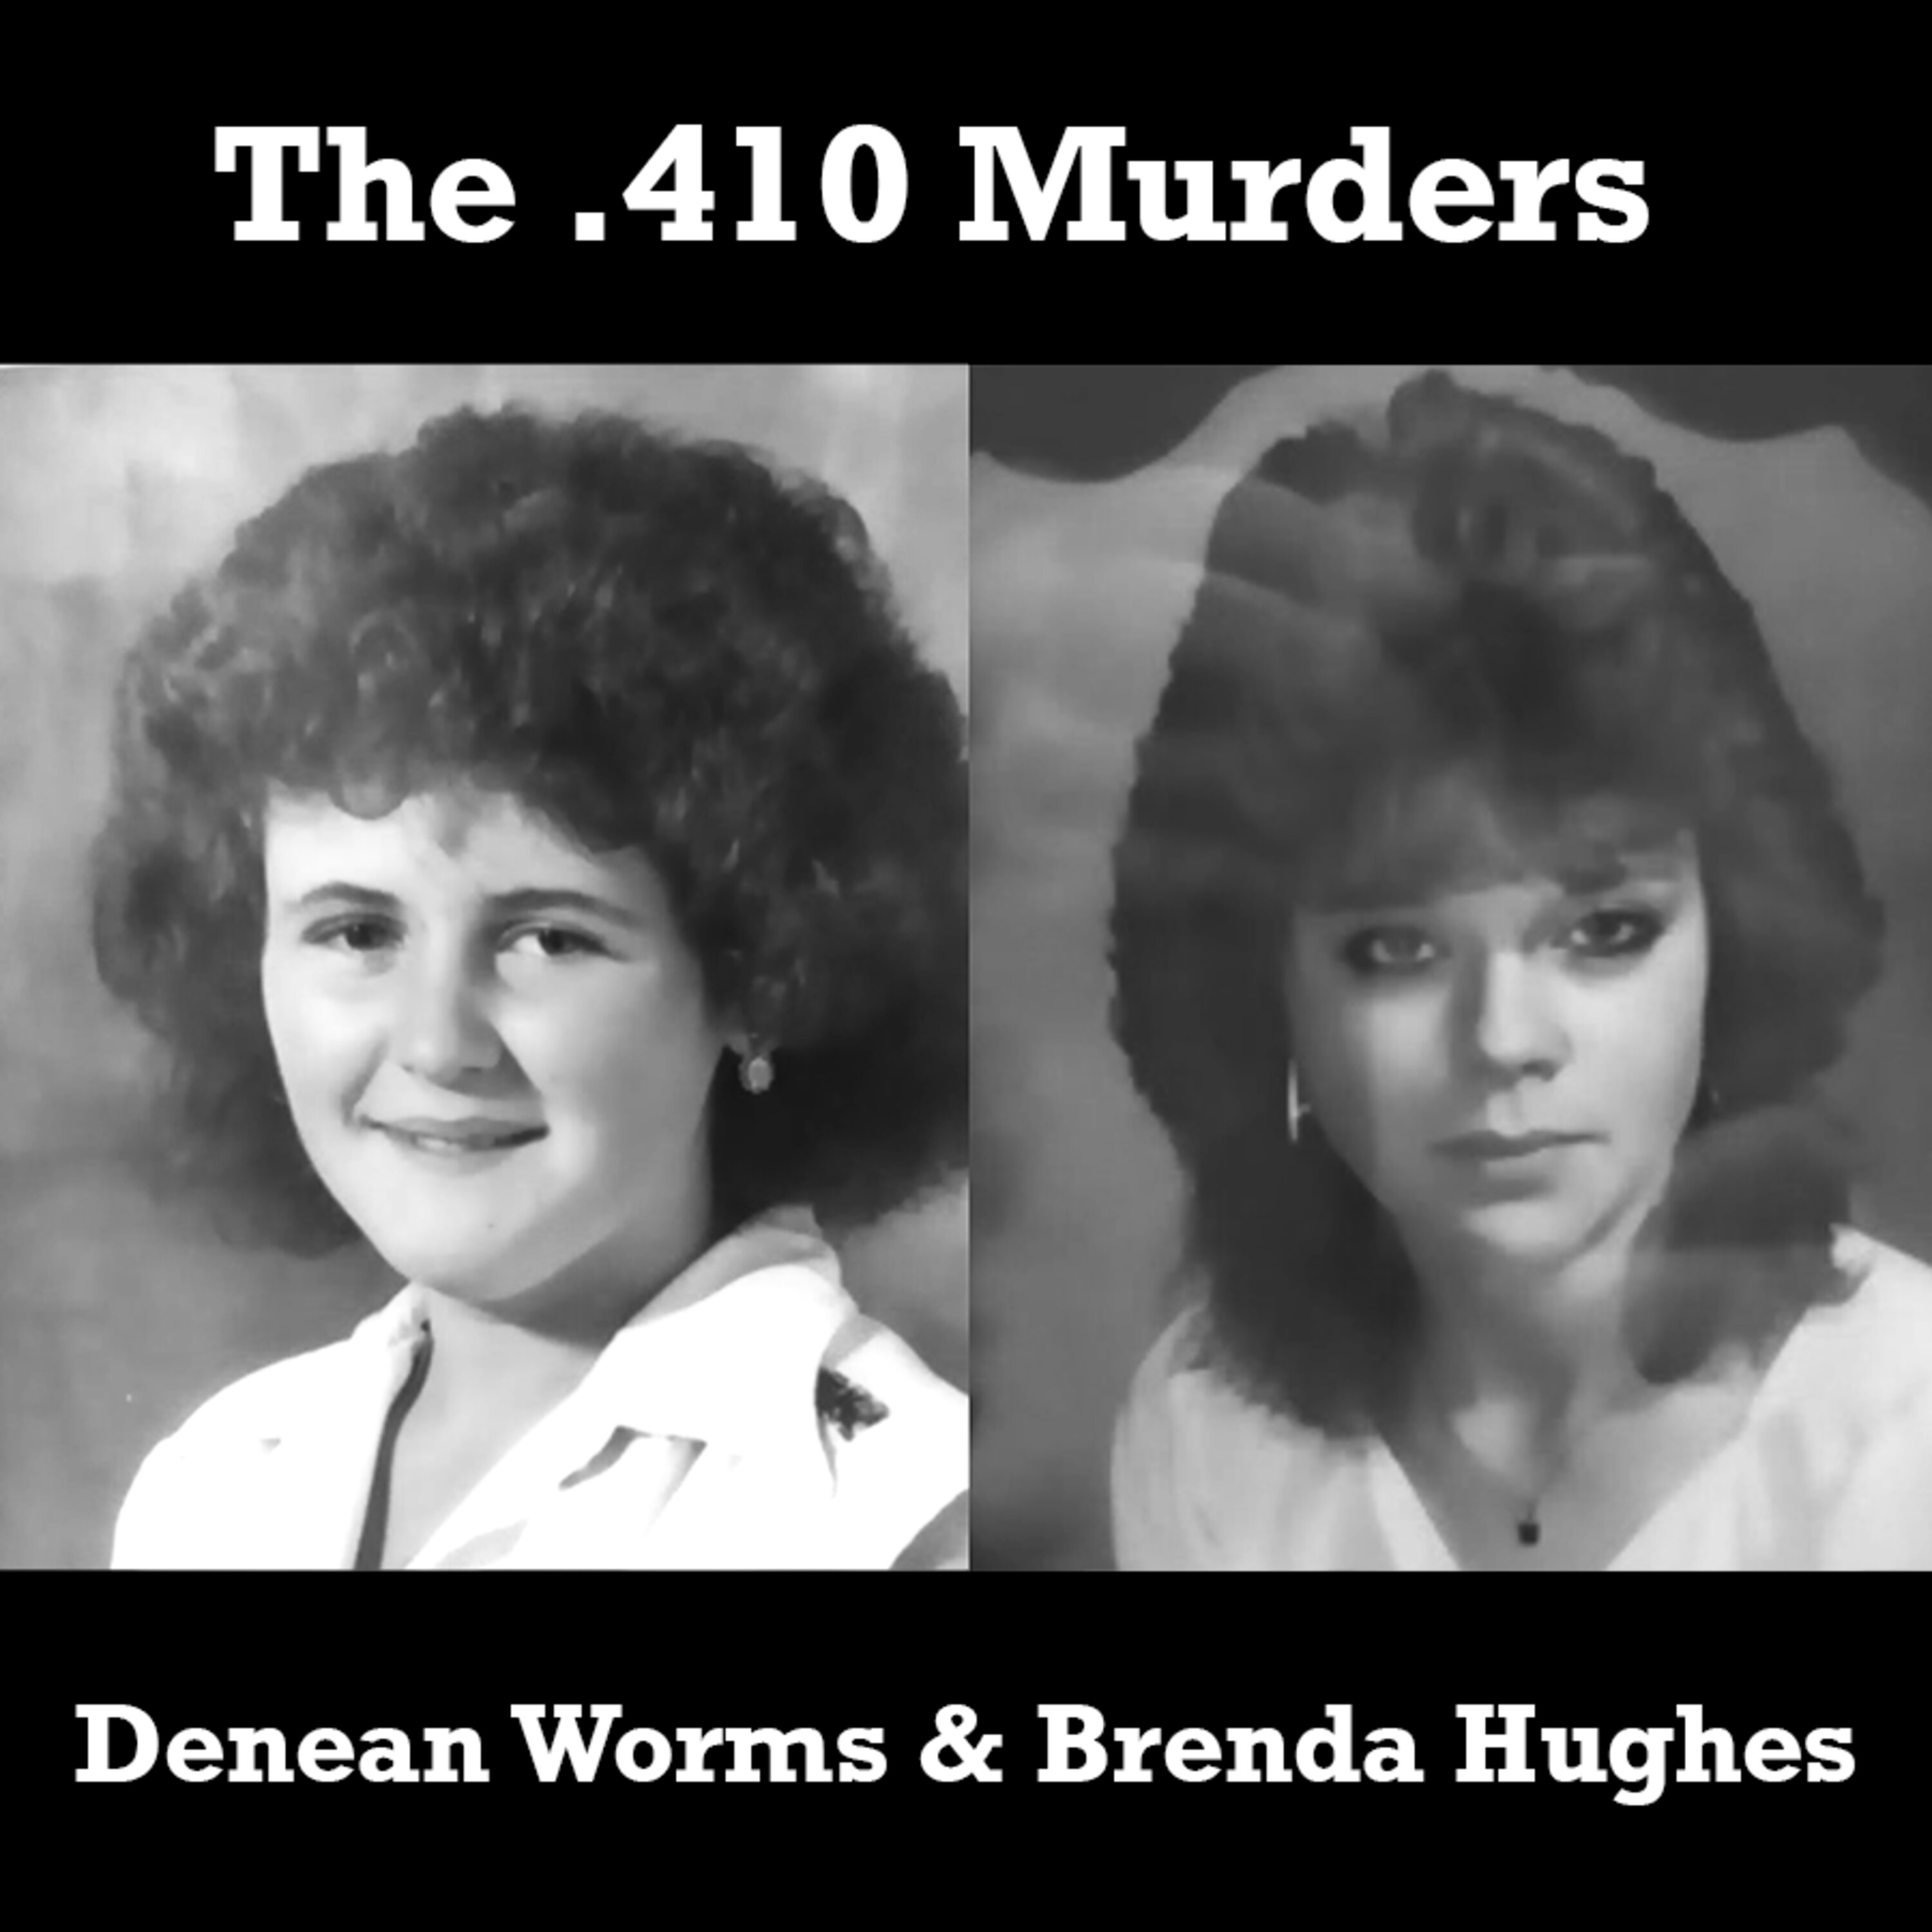 The .410 Murders - Denean Worms and Brenda Hughes (BC) pic